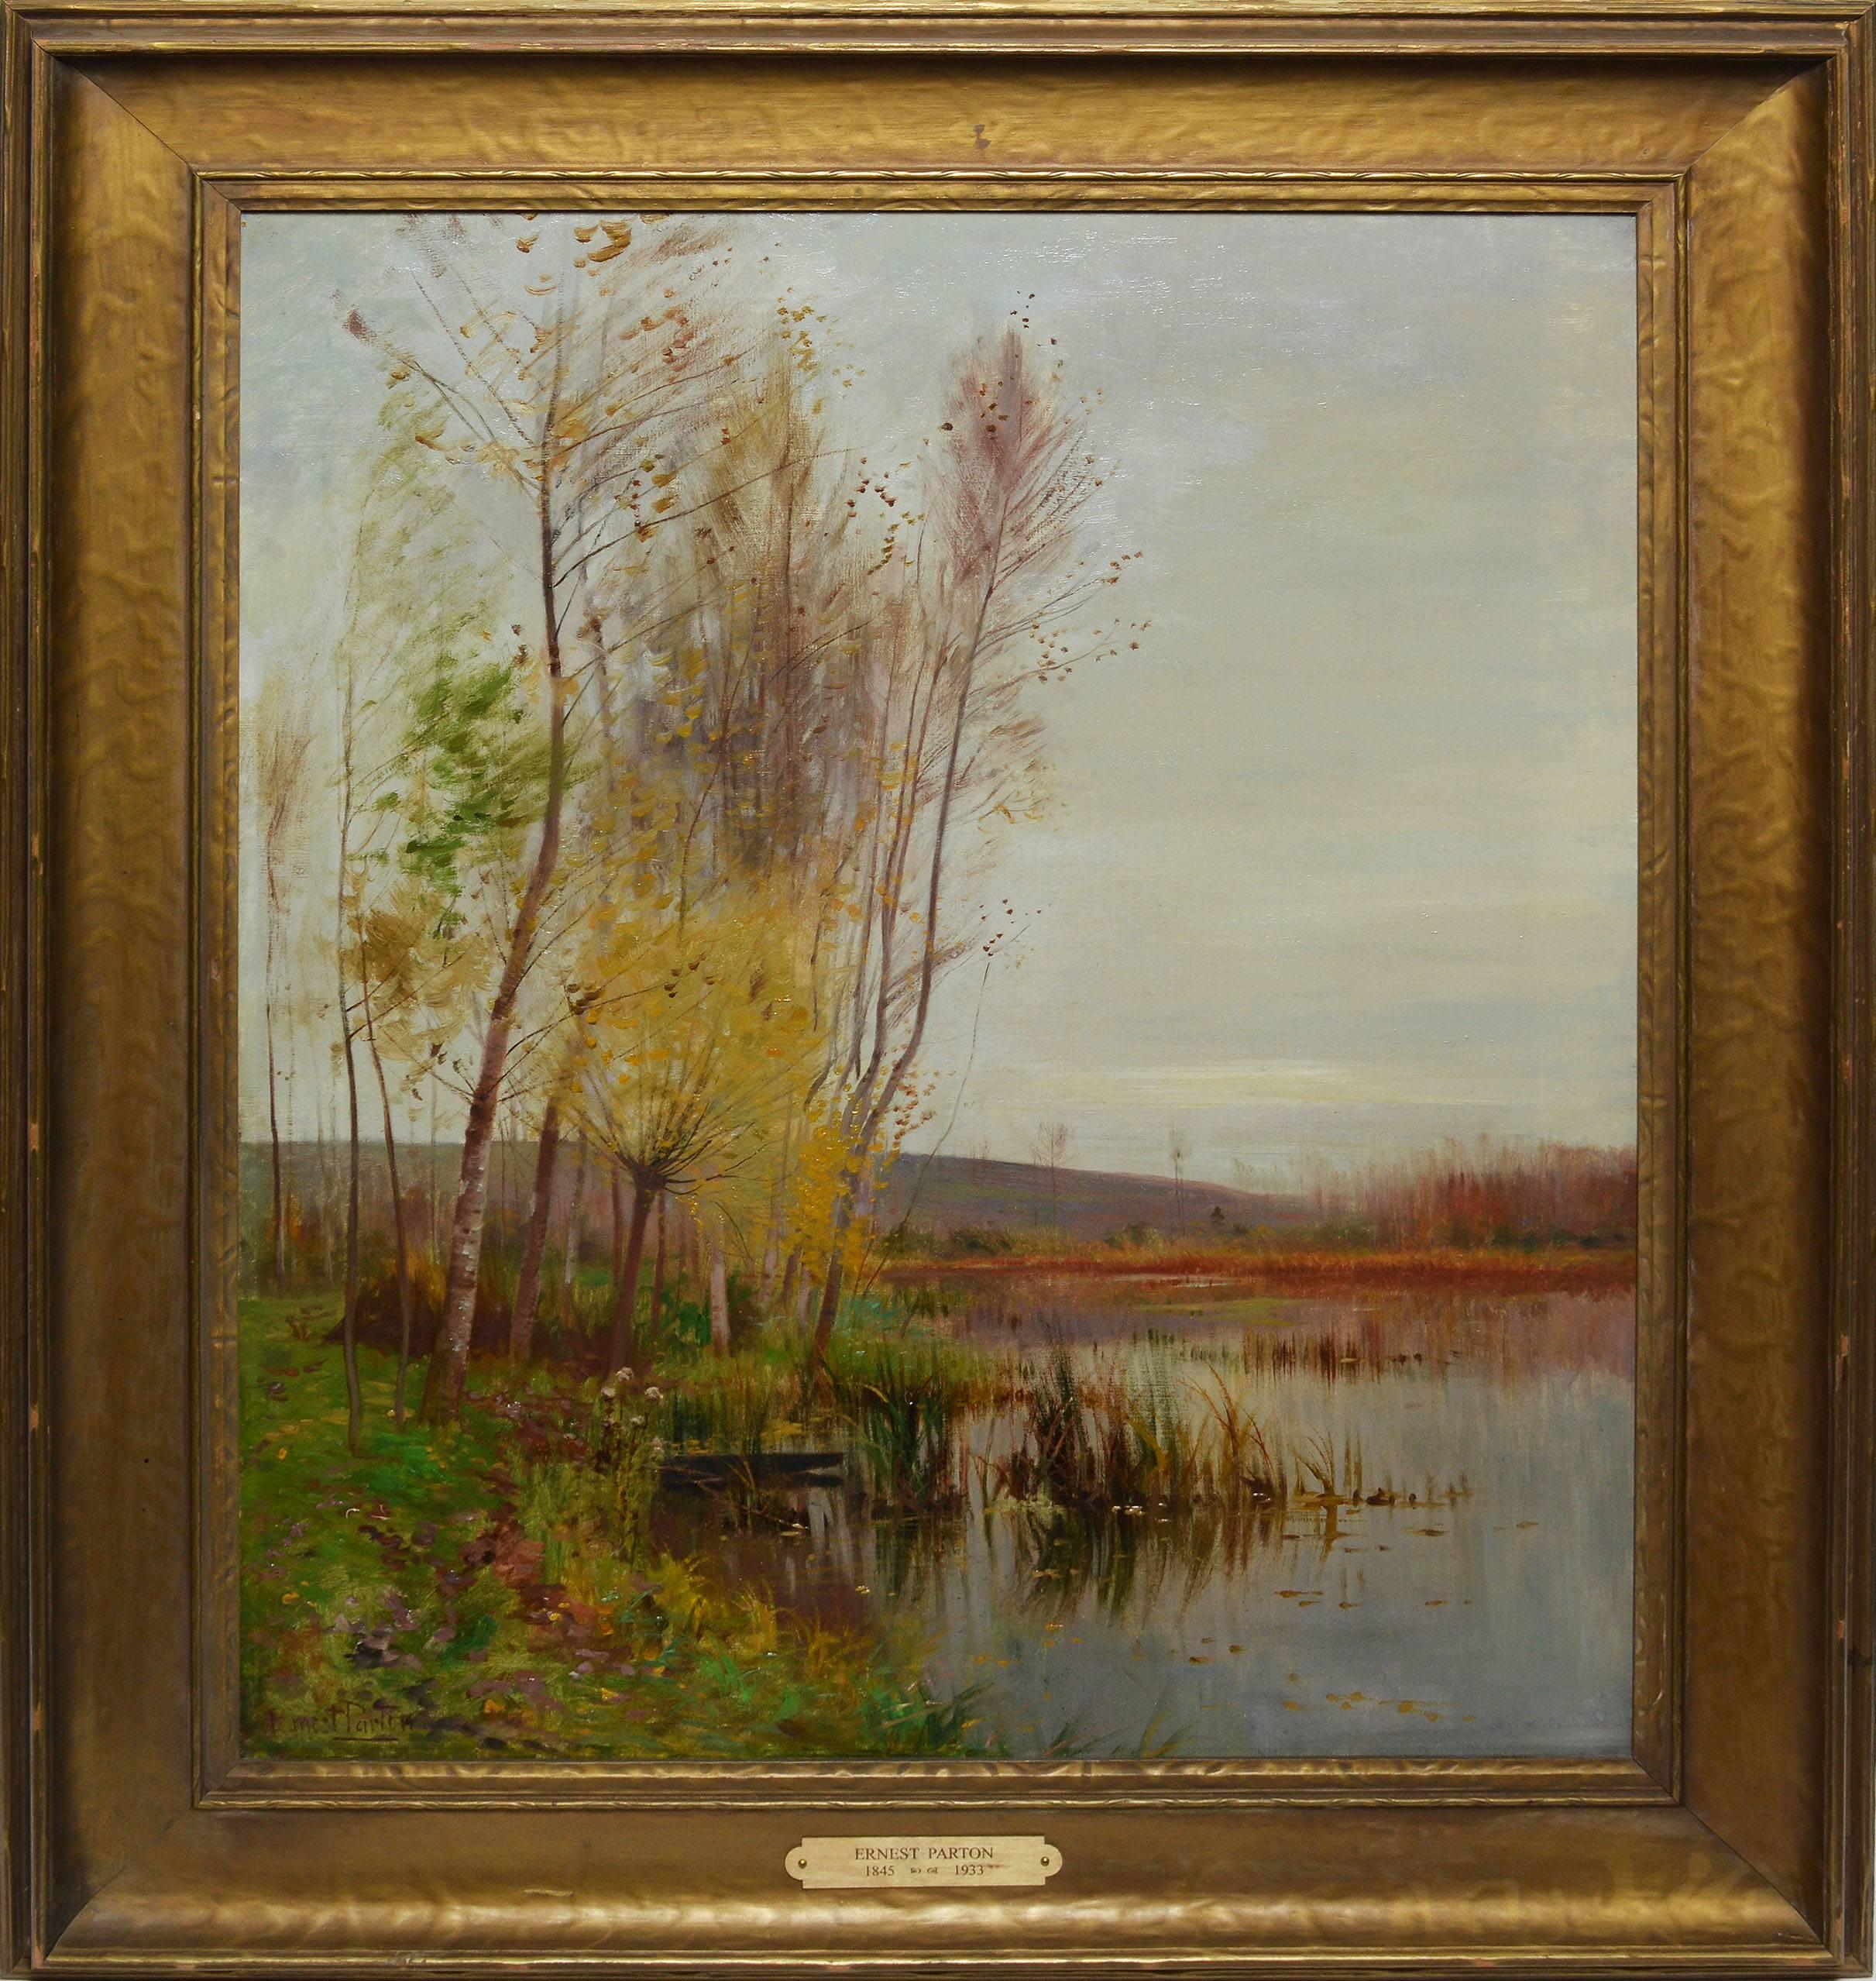 Impressionist fall landscape painting by Ernest Parton (1845-1933). Oil on canvas, circa 1890. Signed lower left, &quot;Ernest Parton&quot;.  Displayed in a period giltwood frame.  Image size, 23&quot;Lx 29&quot;H, overall 31&quot;L x 36&quot;H.